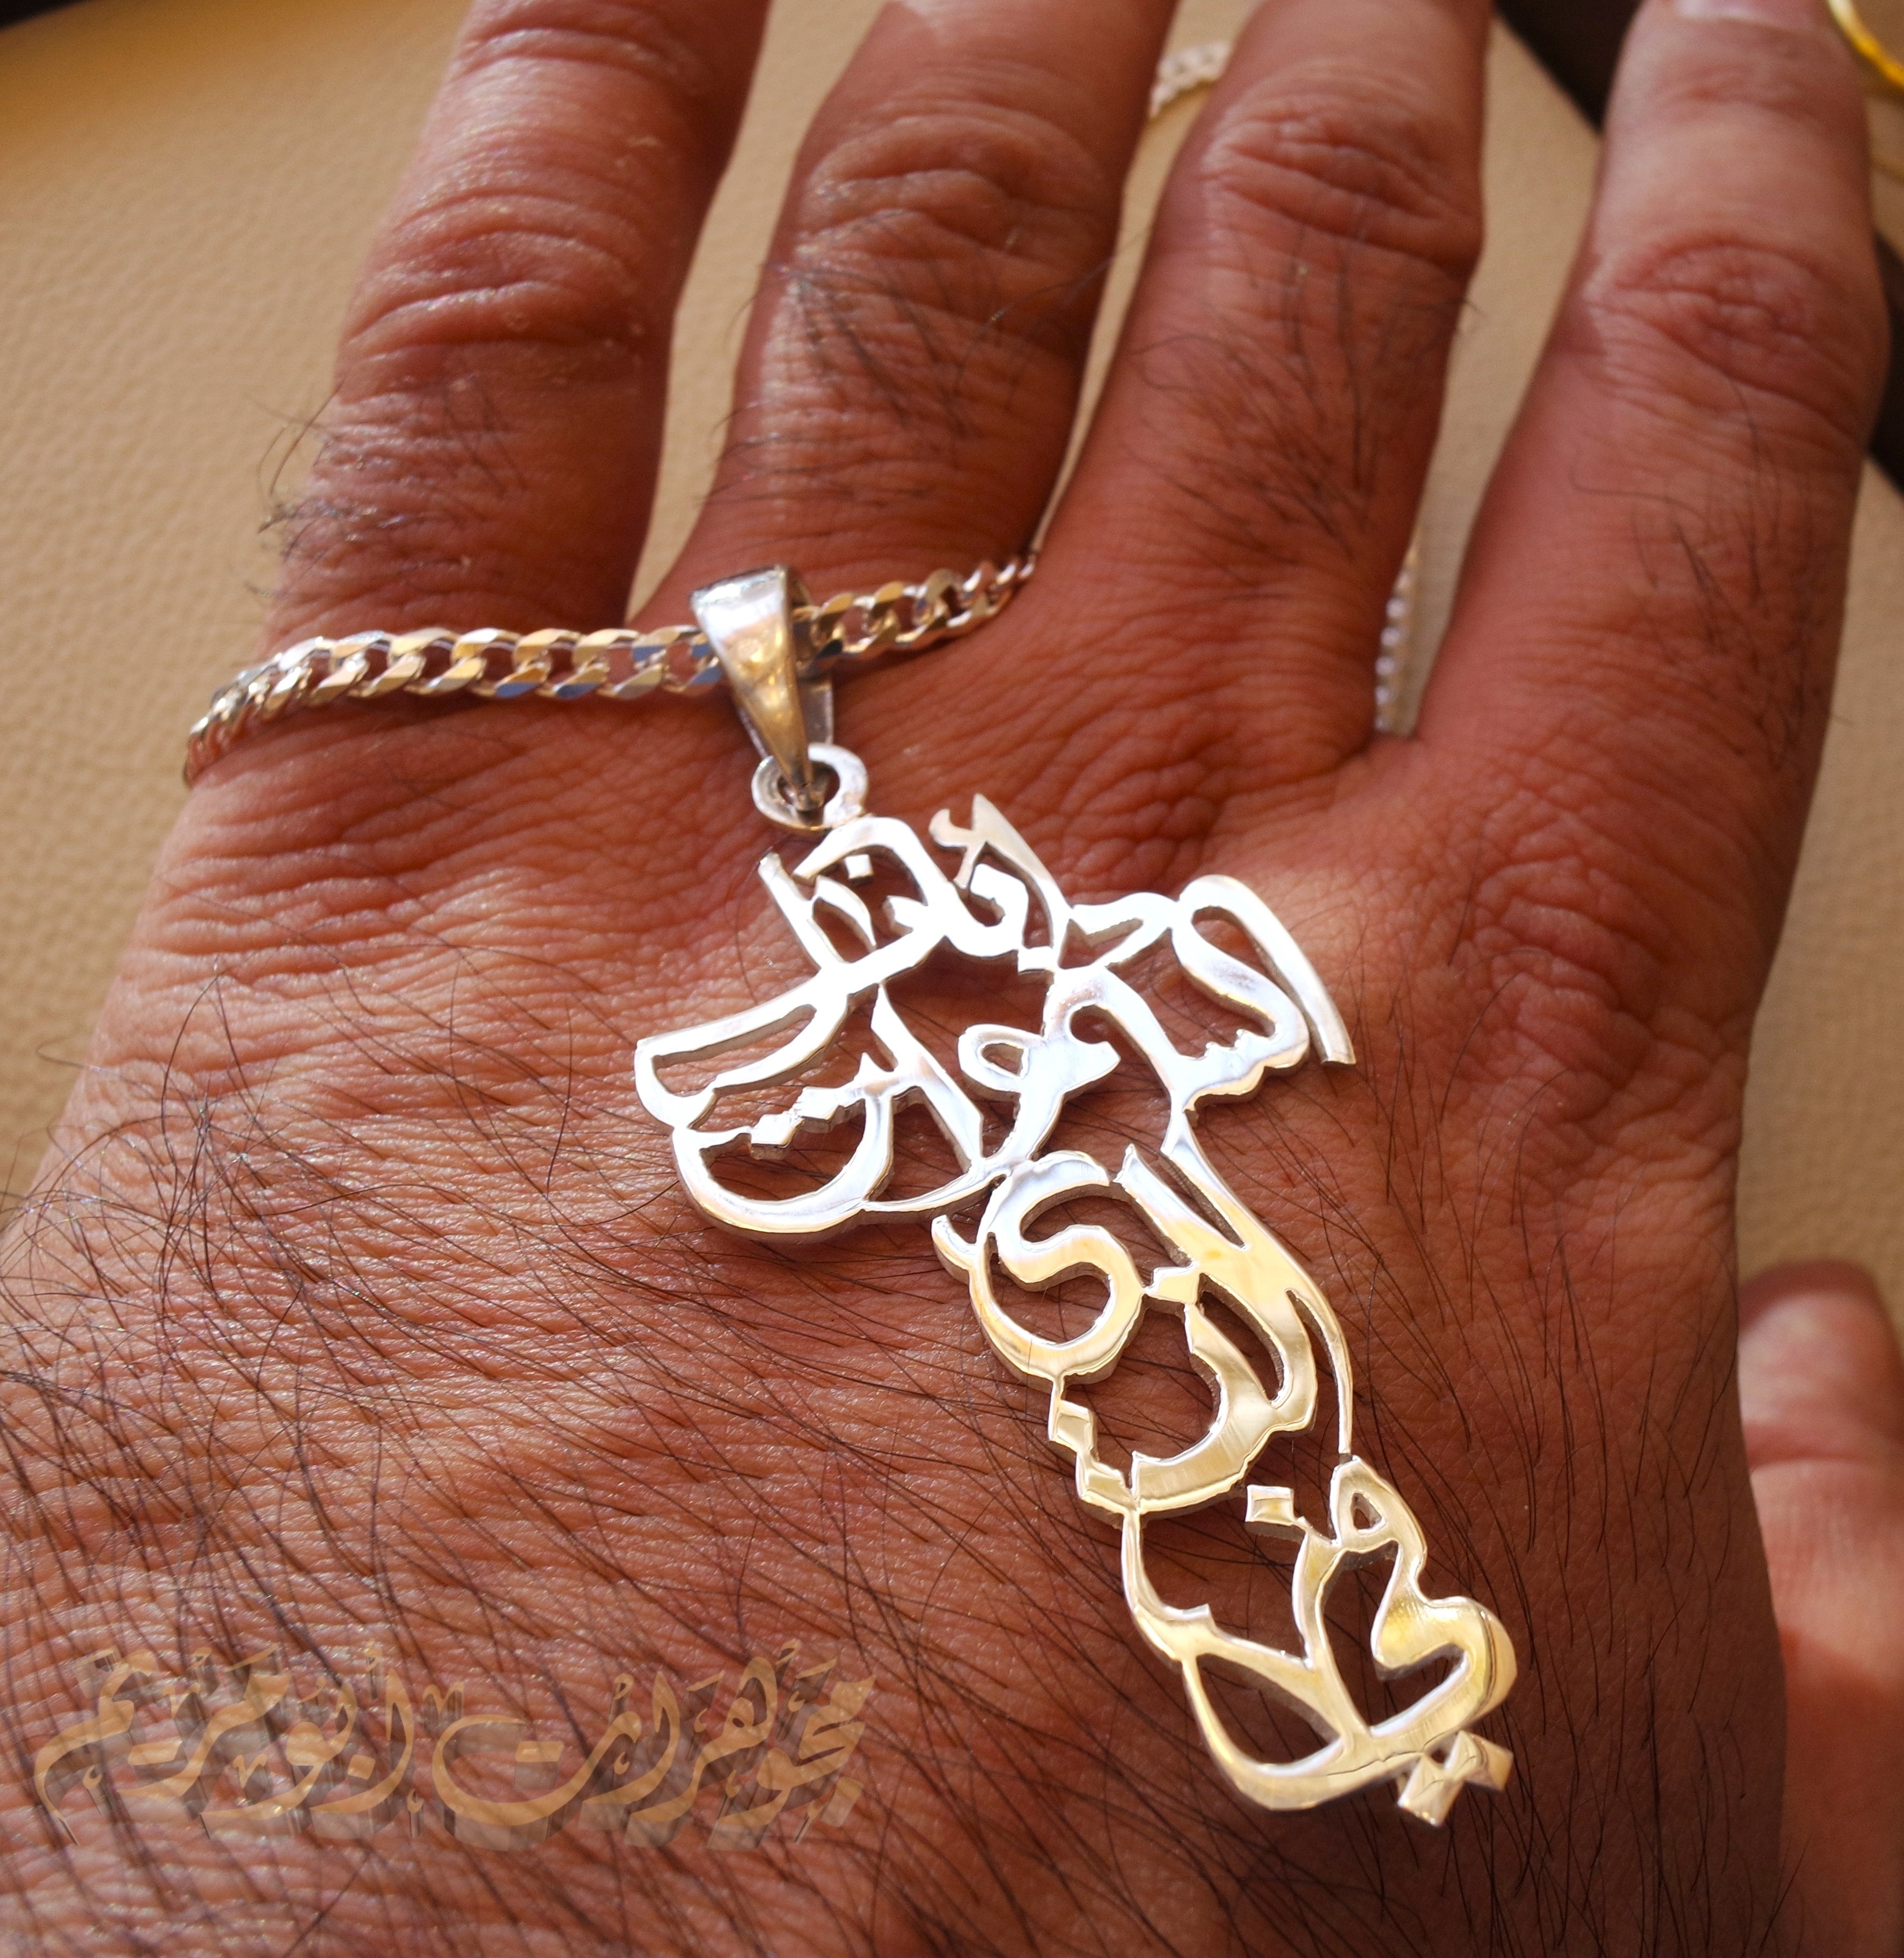 Arabic calligraphy big cross thick chain 2 , our father who art in heaven sterling silver 925 catholic orthodox christianity handmade